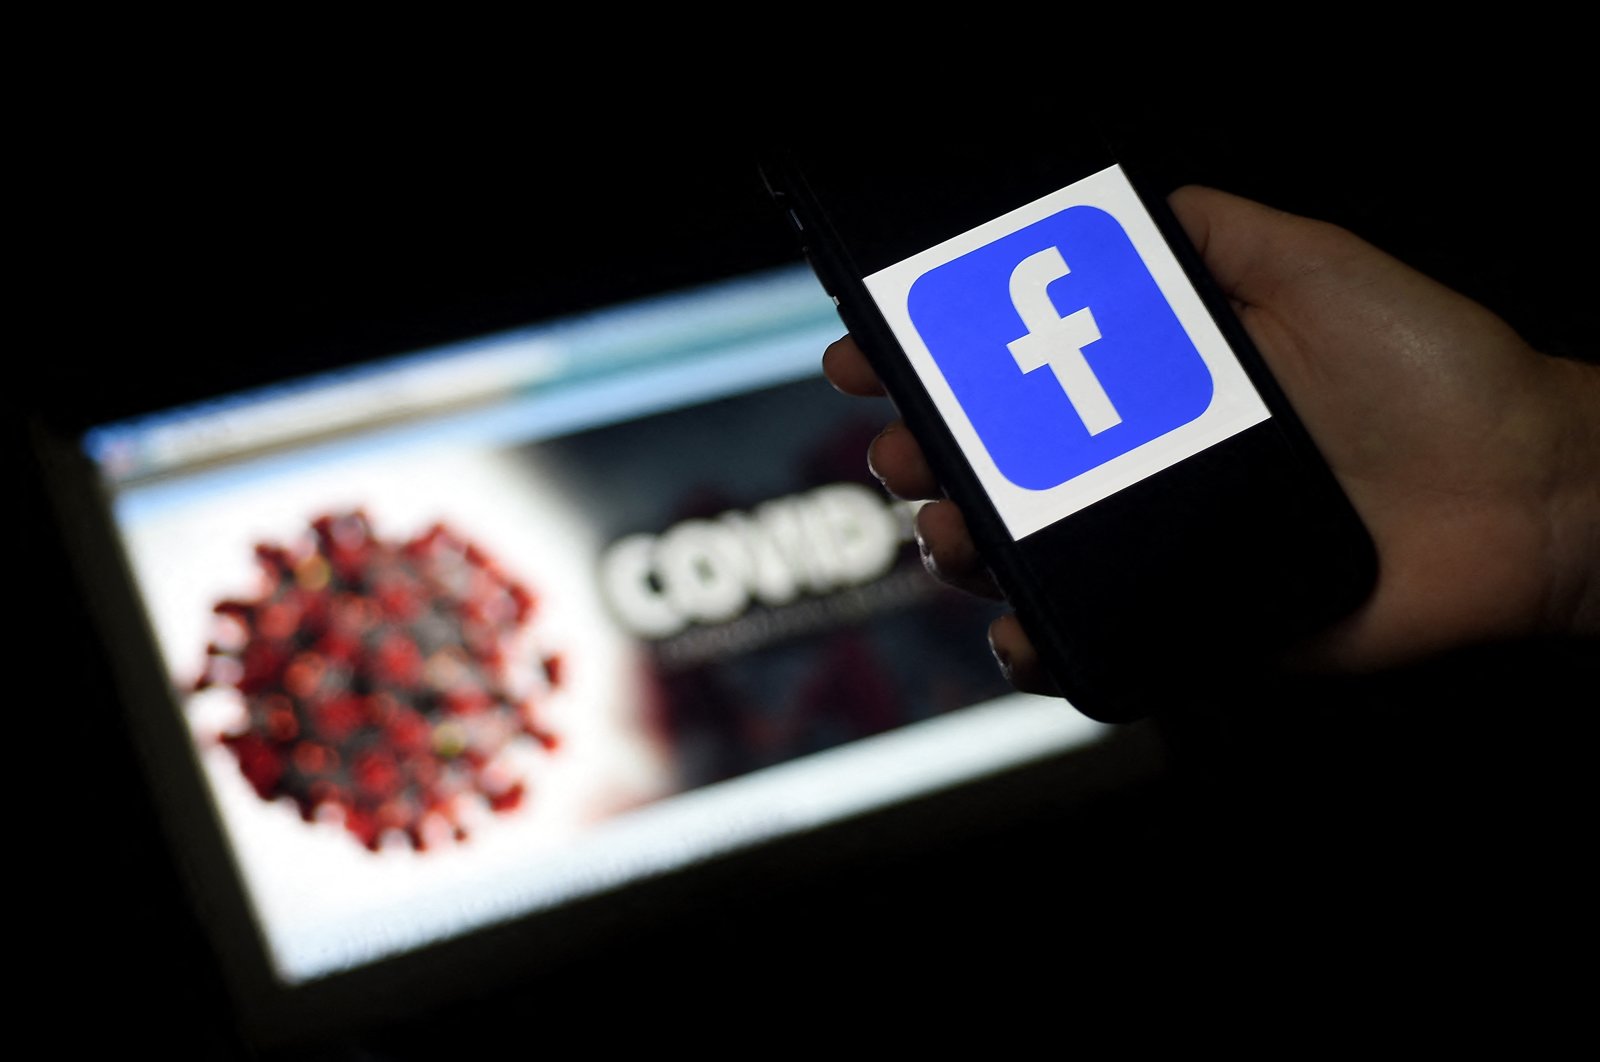 The Facebook logo is displayed on a mobile phone screen photographed on a COVID-19 illustration graphic background in Arlington, Virginia, March 25, 2020. (AFP Photo)